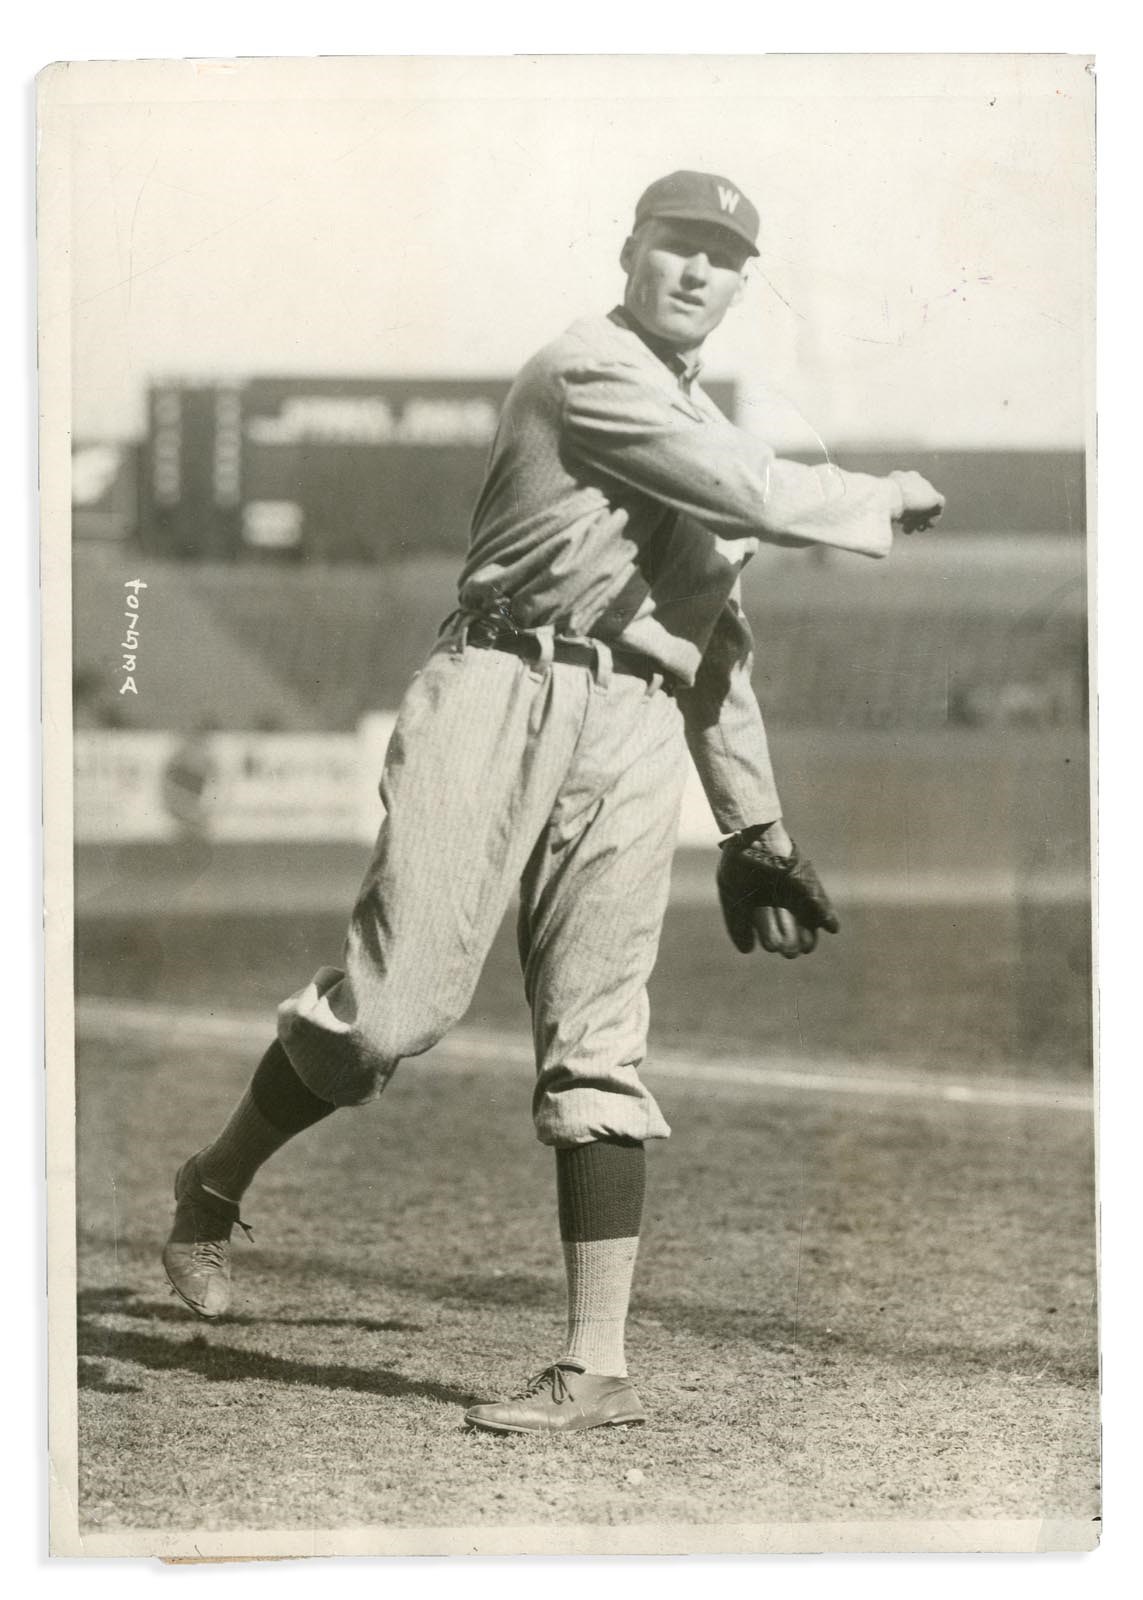 - 1920 Walter Johnson Type 1 Photo Referencing His No-Hitter